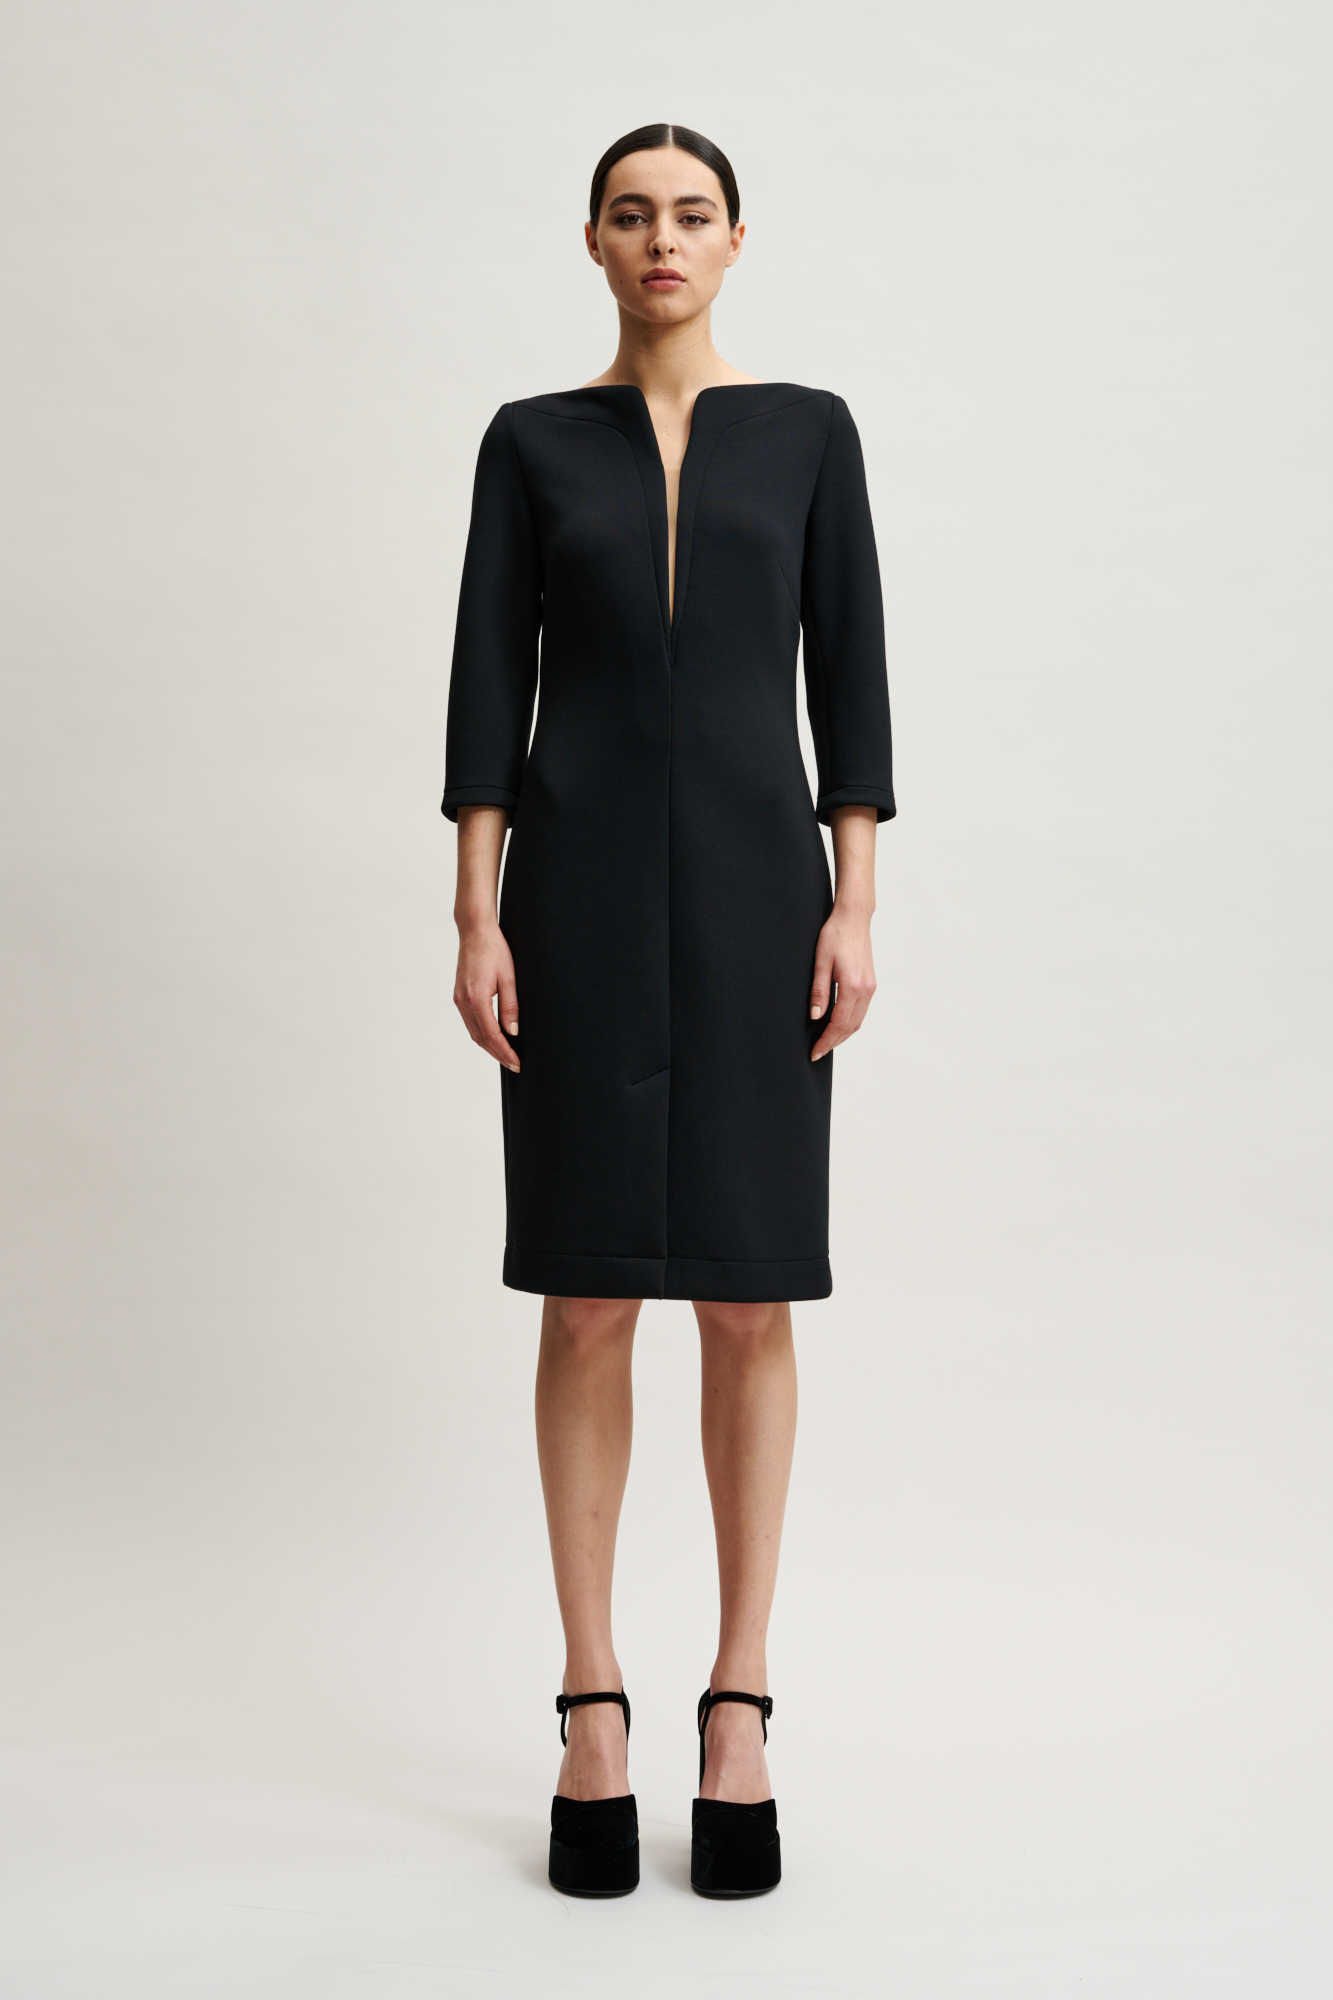 VICHY-J7ZN02 – Fitted dress | Natan Official website